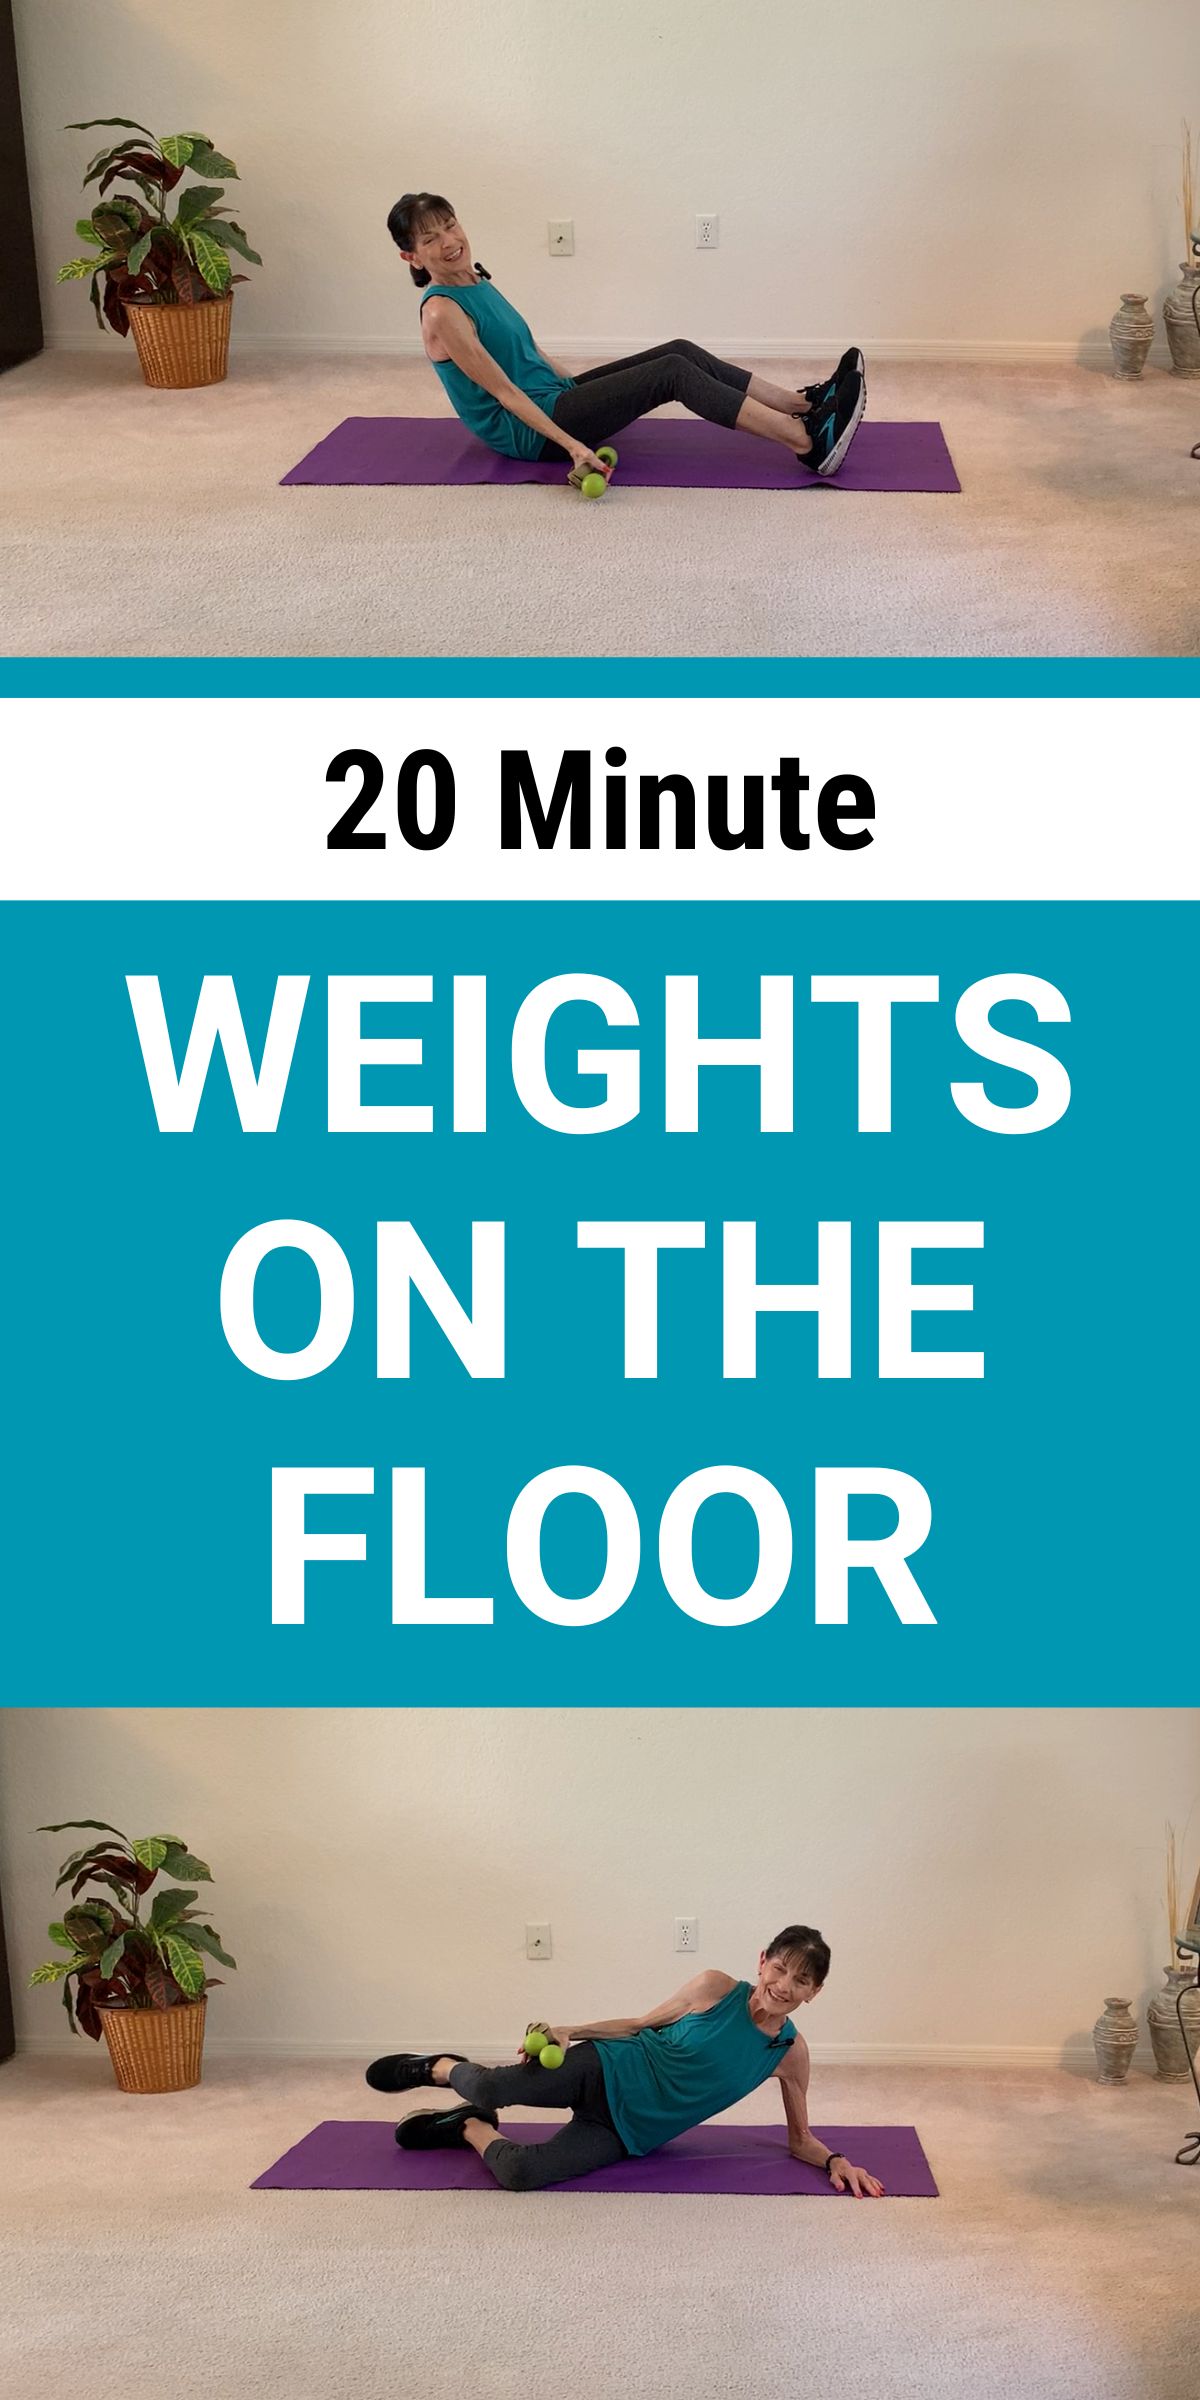 20 minute weights on the floor workout